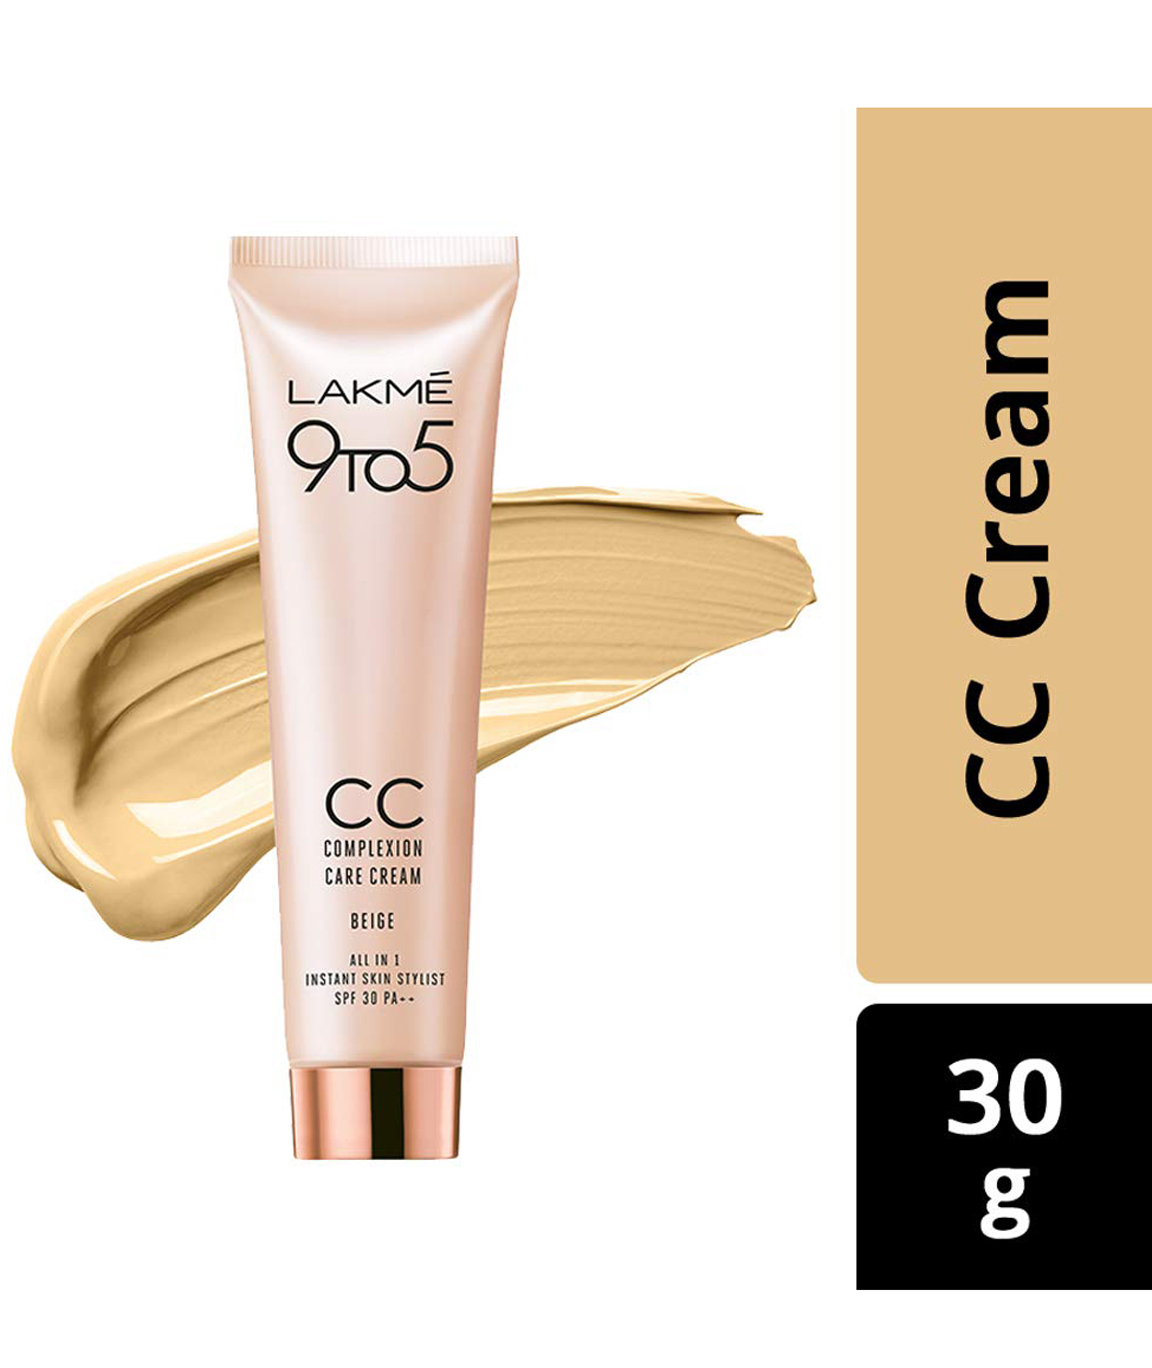 Lakme 9 to 5 Complexion Care Face Cream, Beige, 30gm